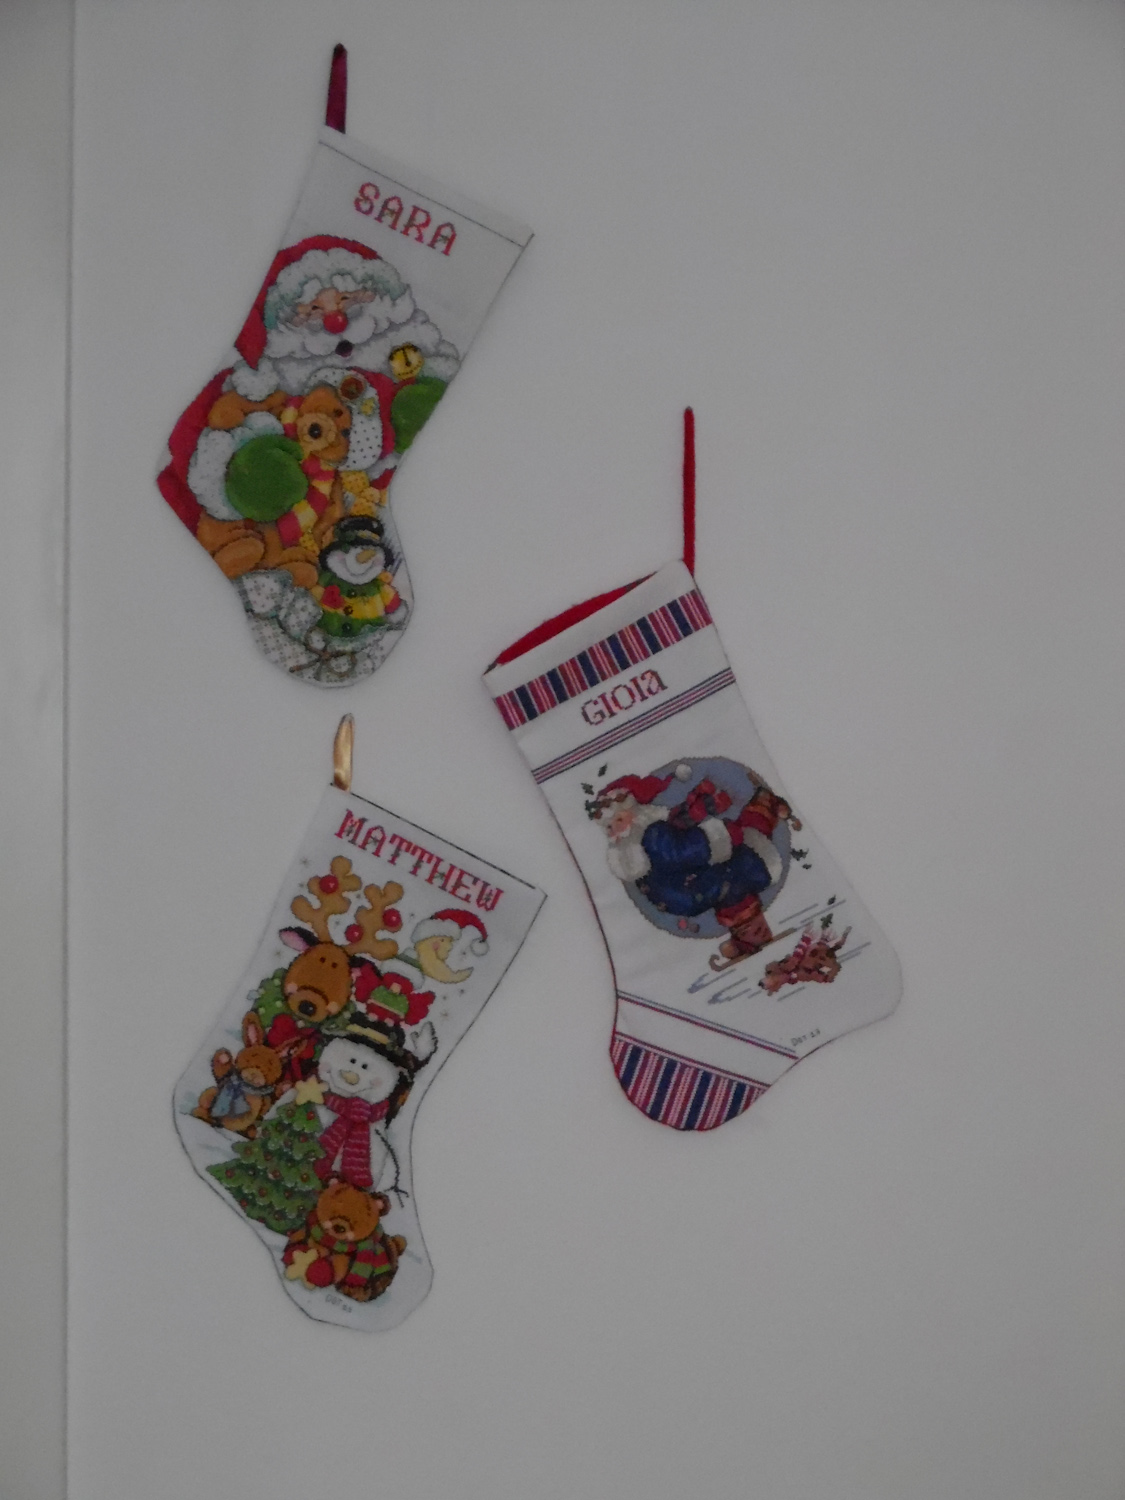 Dot's cross-stitch stockings for the kids